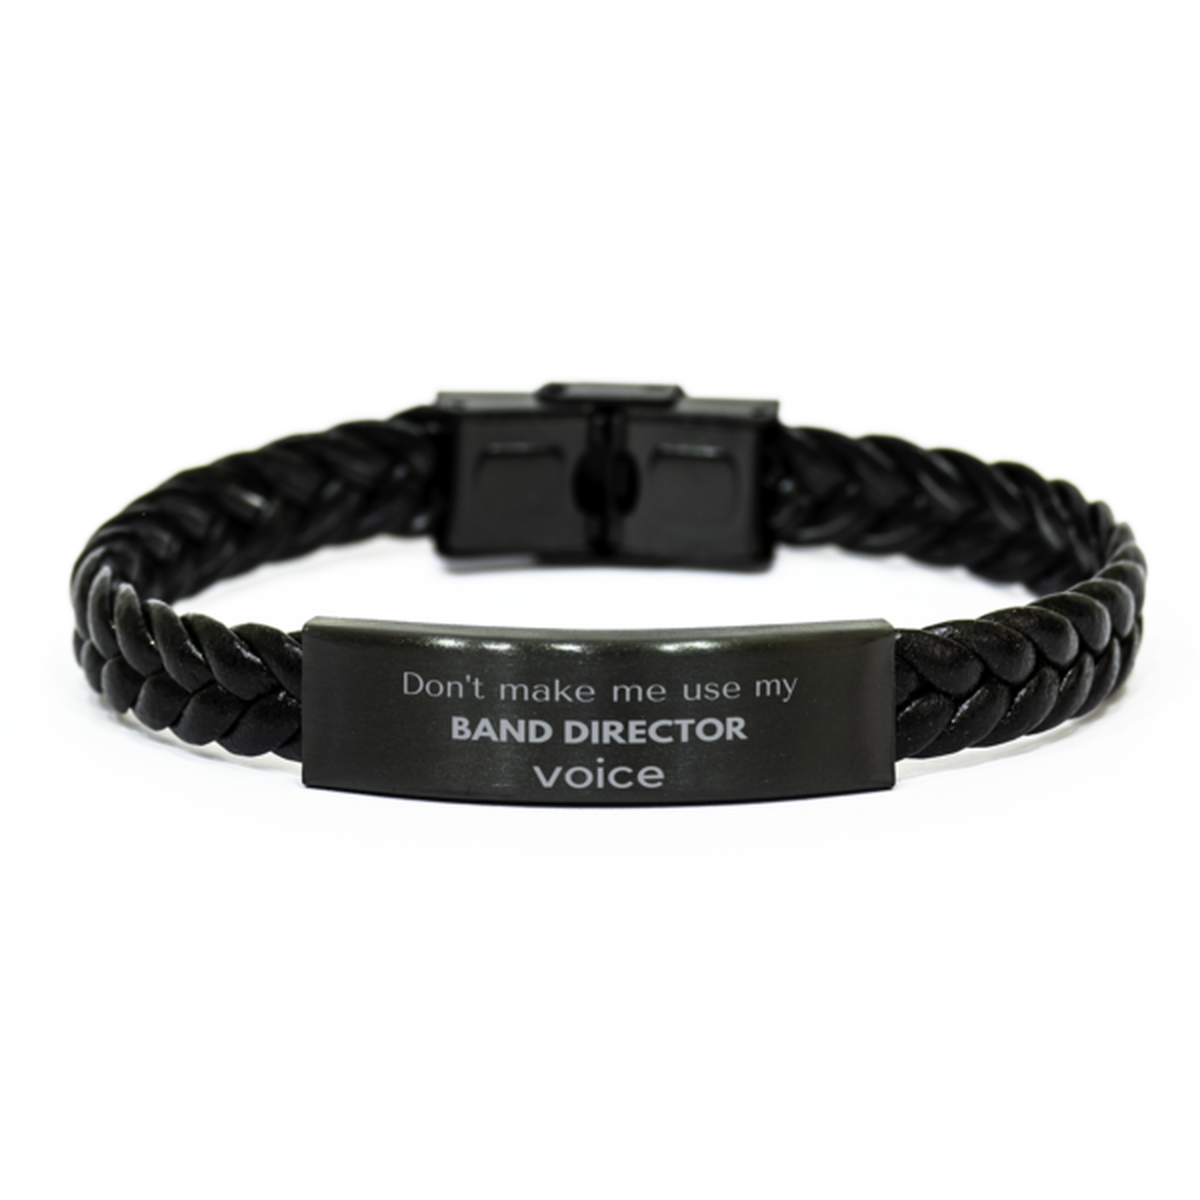 Don't make me use my Band Director voice, Sarcasm Band Director Gifts, Christmas Band Director Braided Leather Bracelet Birthday Unique Gifts For Band Director Coworkers, Men, Women, Colleague, Friends